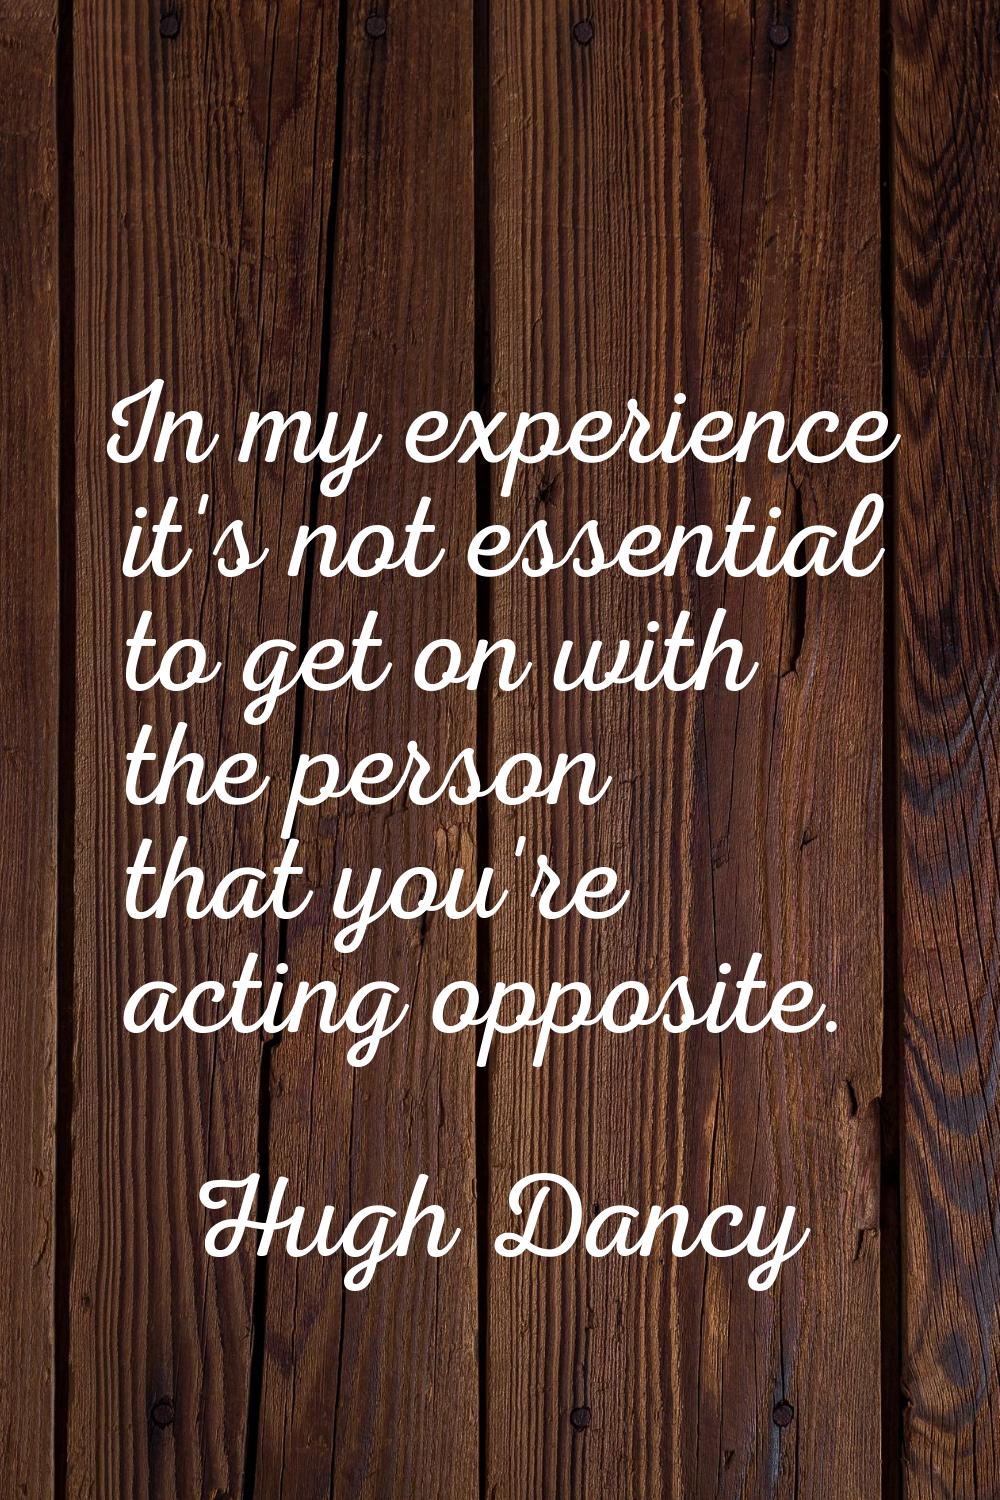 In my experience it's not essential to get on with the person that you're acting opposite.